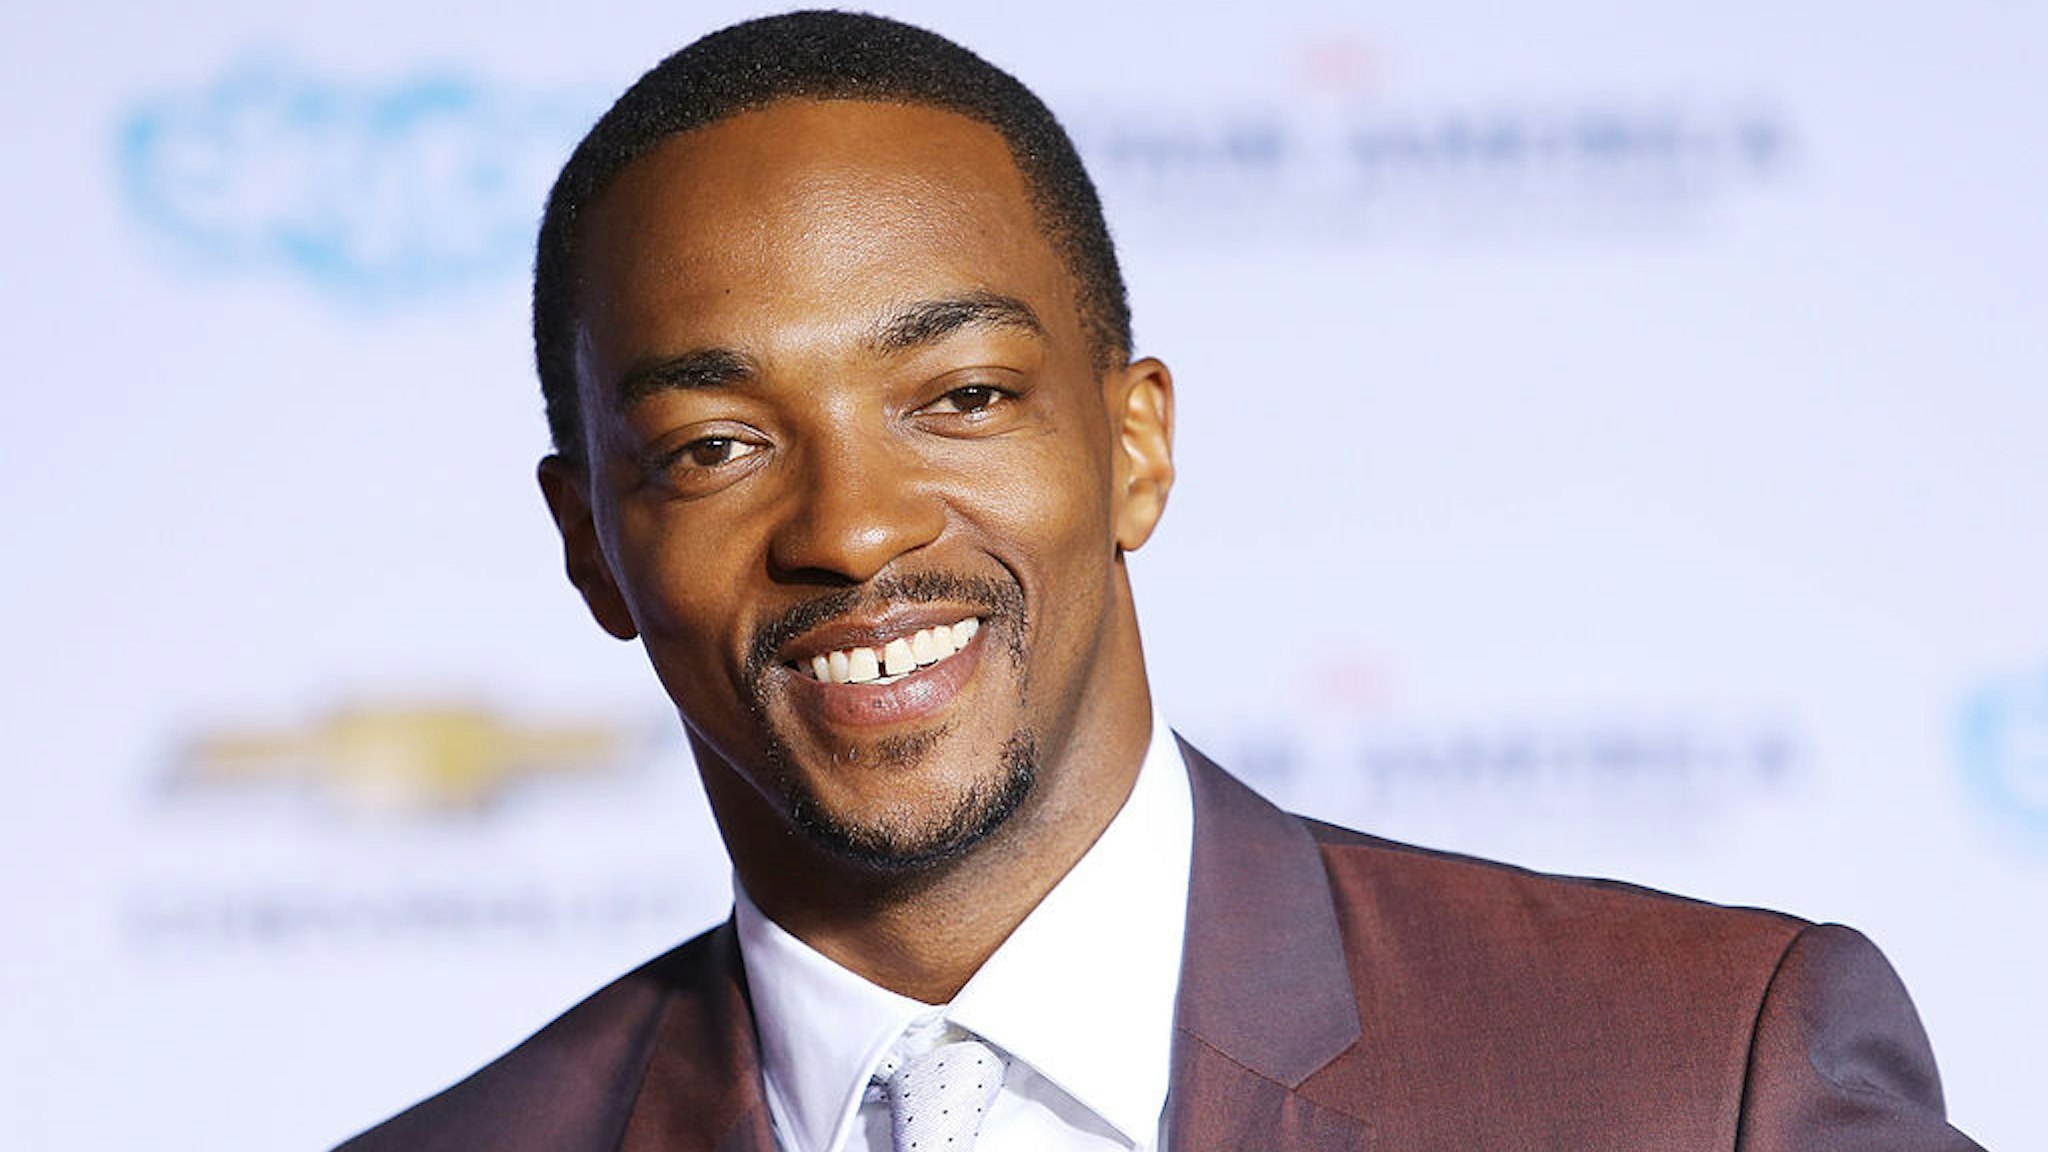 HOLLYWOOD, CA - MARCH 13: Anthony Mackie arrives at the Los Angeles premiere of "Captain America: The Winter Soldier" held at the El Capitan Theatre on March 13, 2014 in Hollywood, California. (Photo by Michael Tran/FilmMagic)